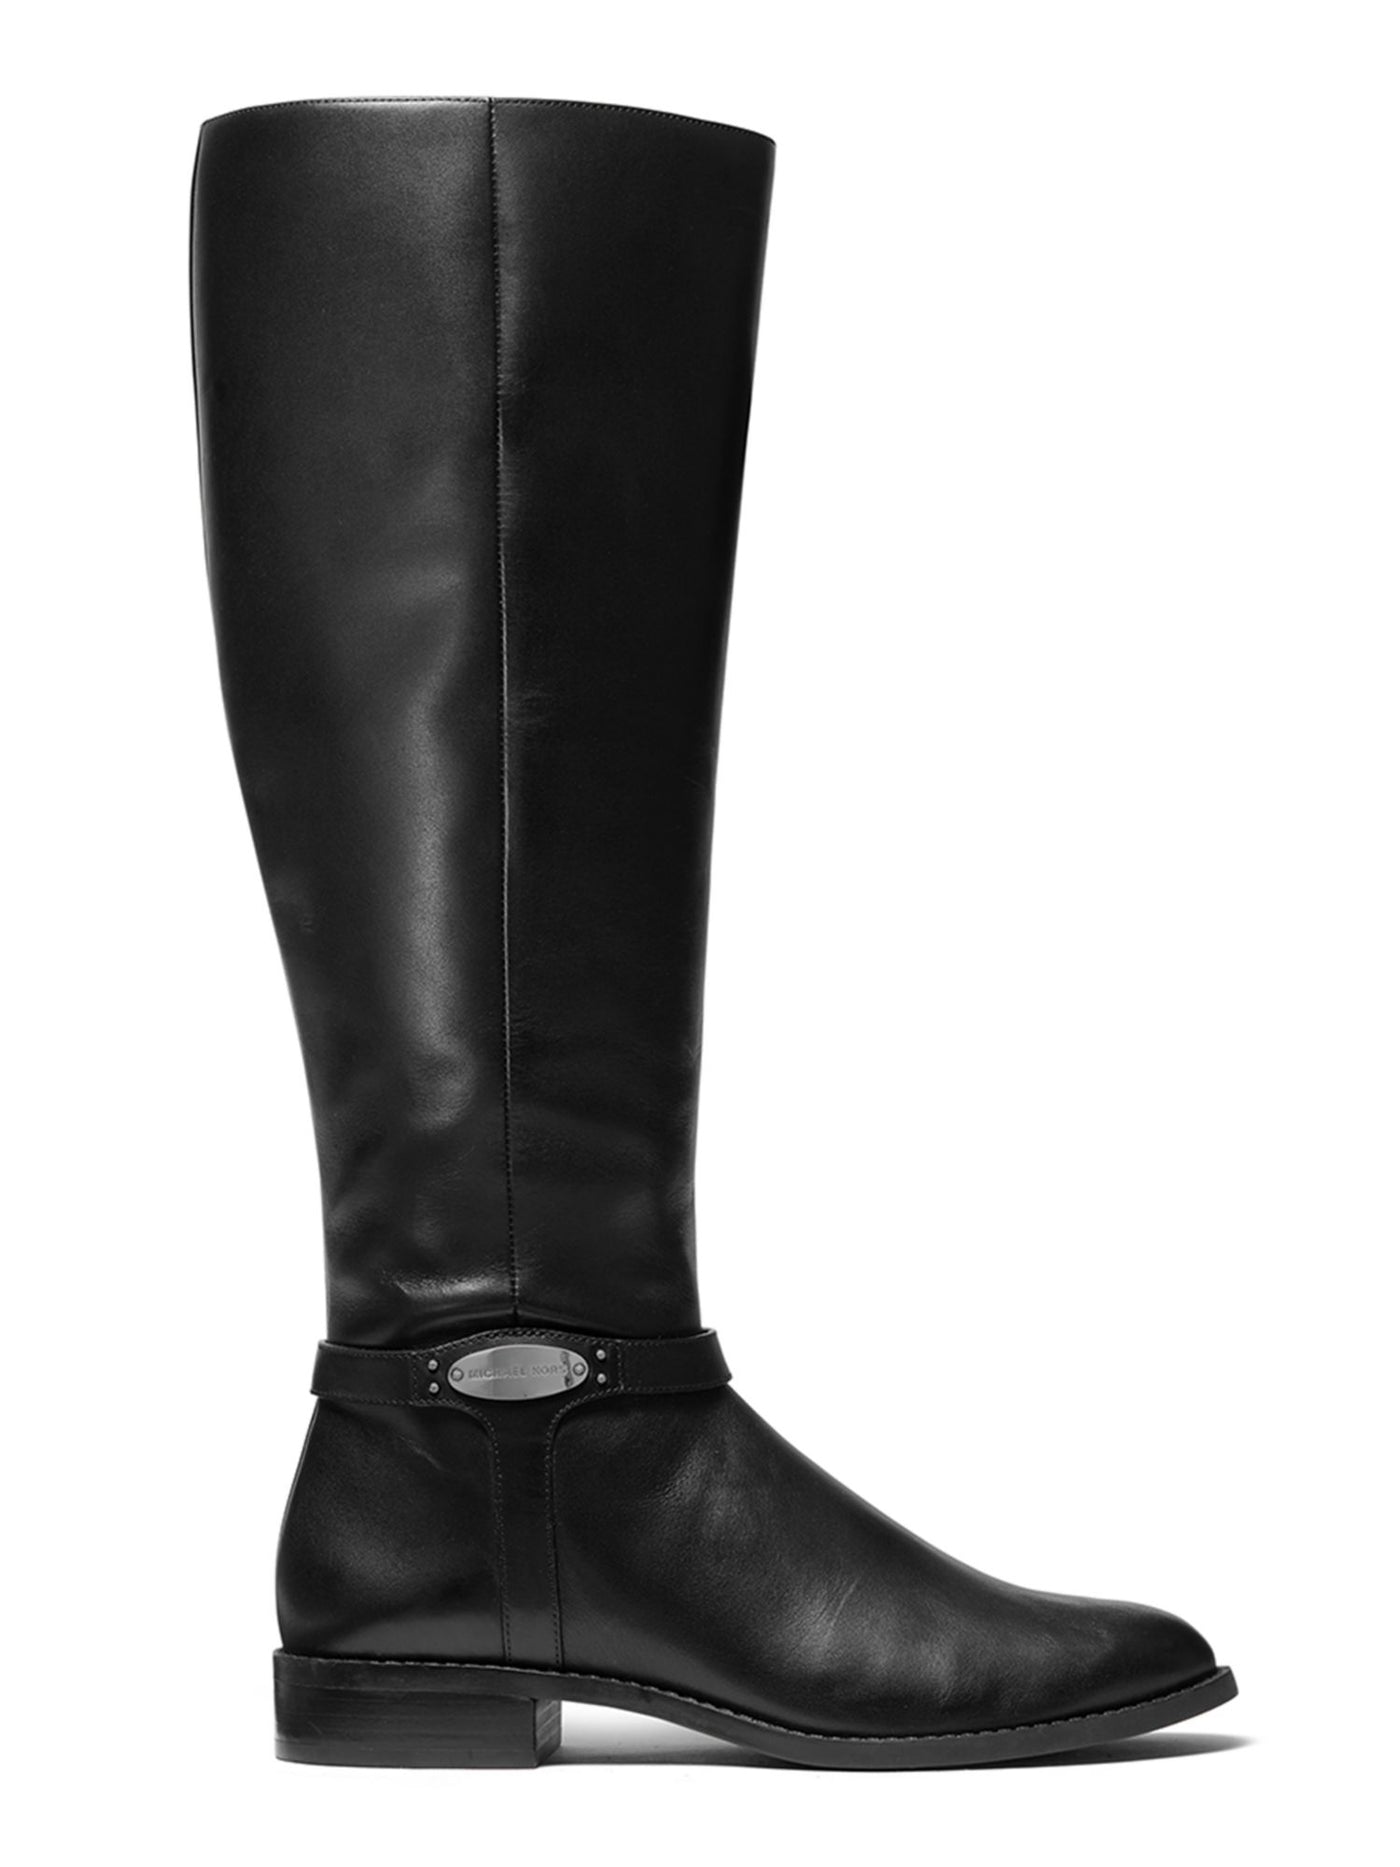 MICHAEL KORS Womens Black Hardware Detail Stretch Finley Round Toe Block Heel Zip-Up Leather Riding Boot 5 M